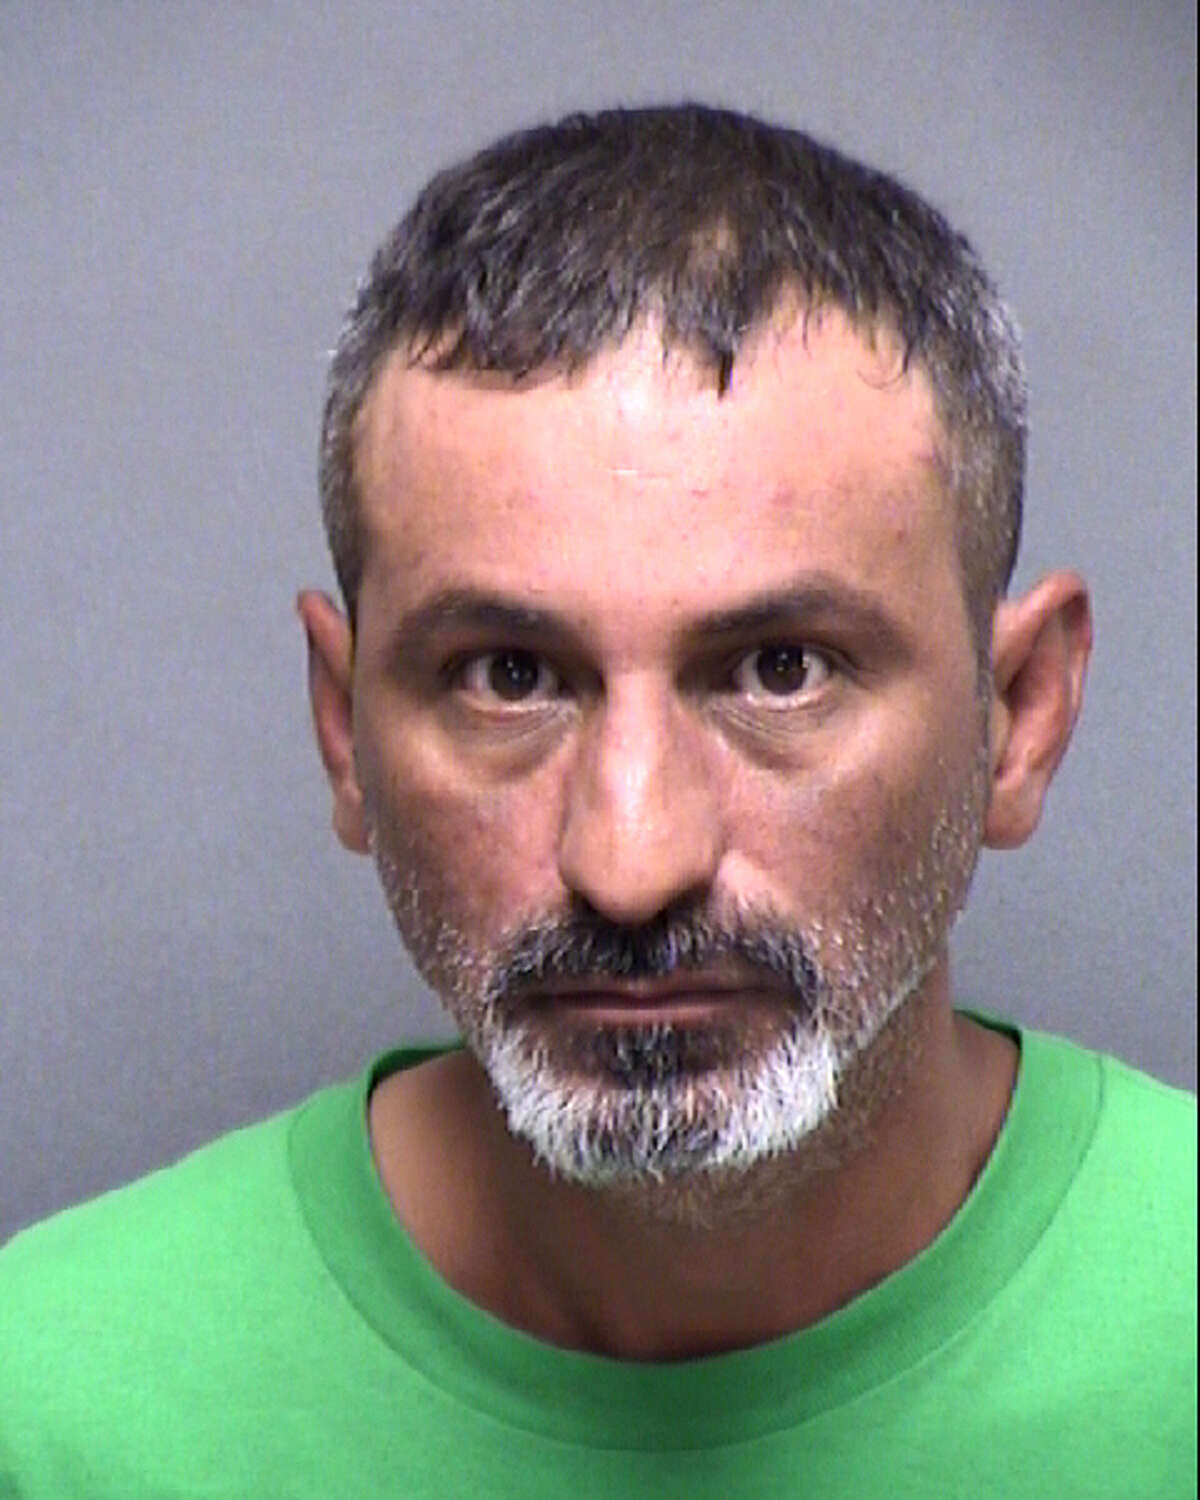 Adan Garcia was charged with driving while intoxicated, third or more, on July, 5, 2019.